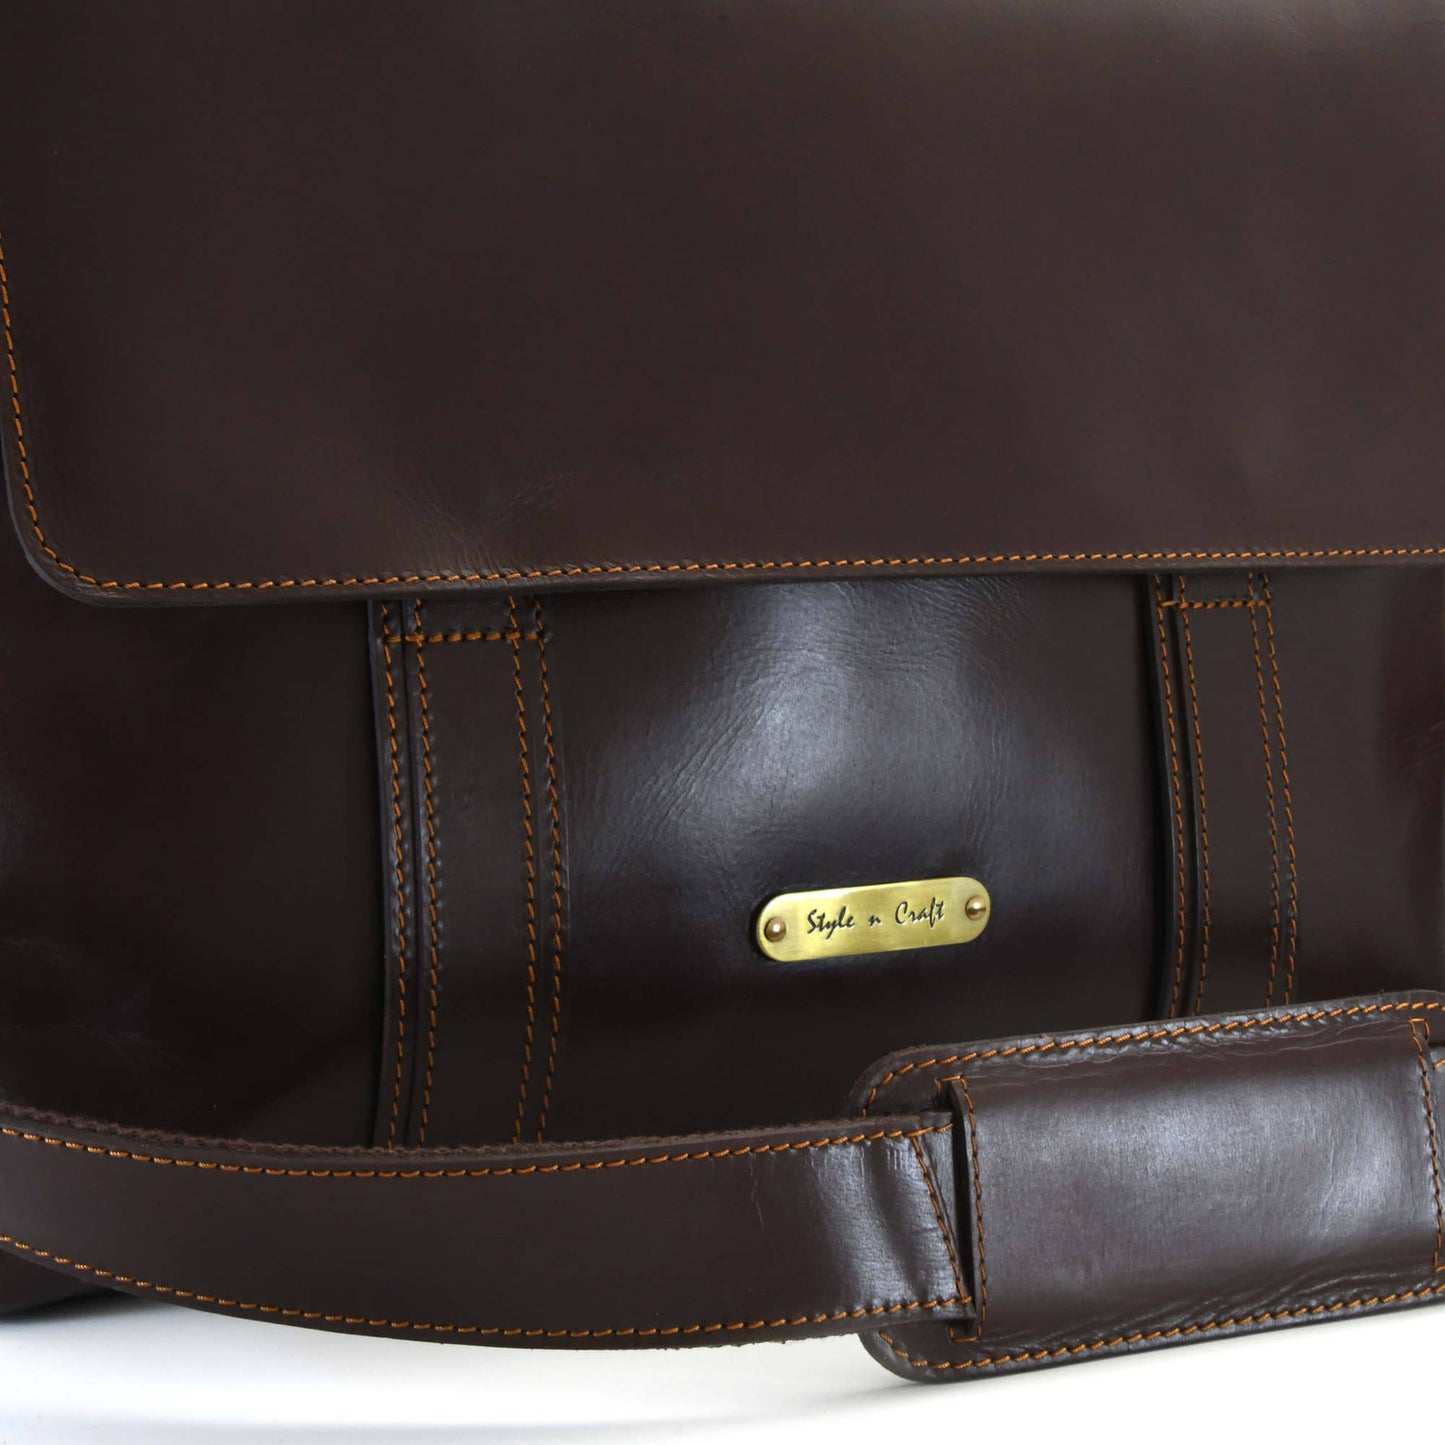 Style n Craft 392005 Messenger Bag in Full Grain Dark Brown Leather - Front Profile View showing the Logo